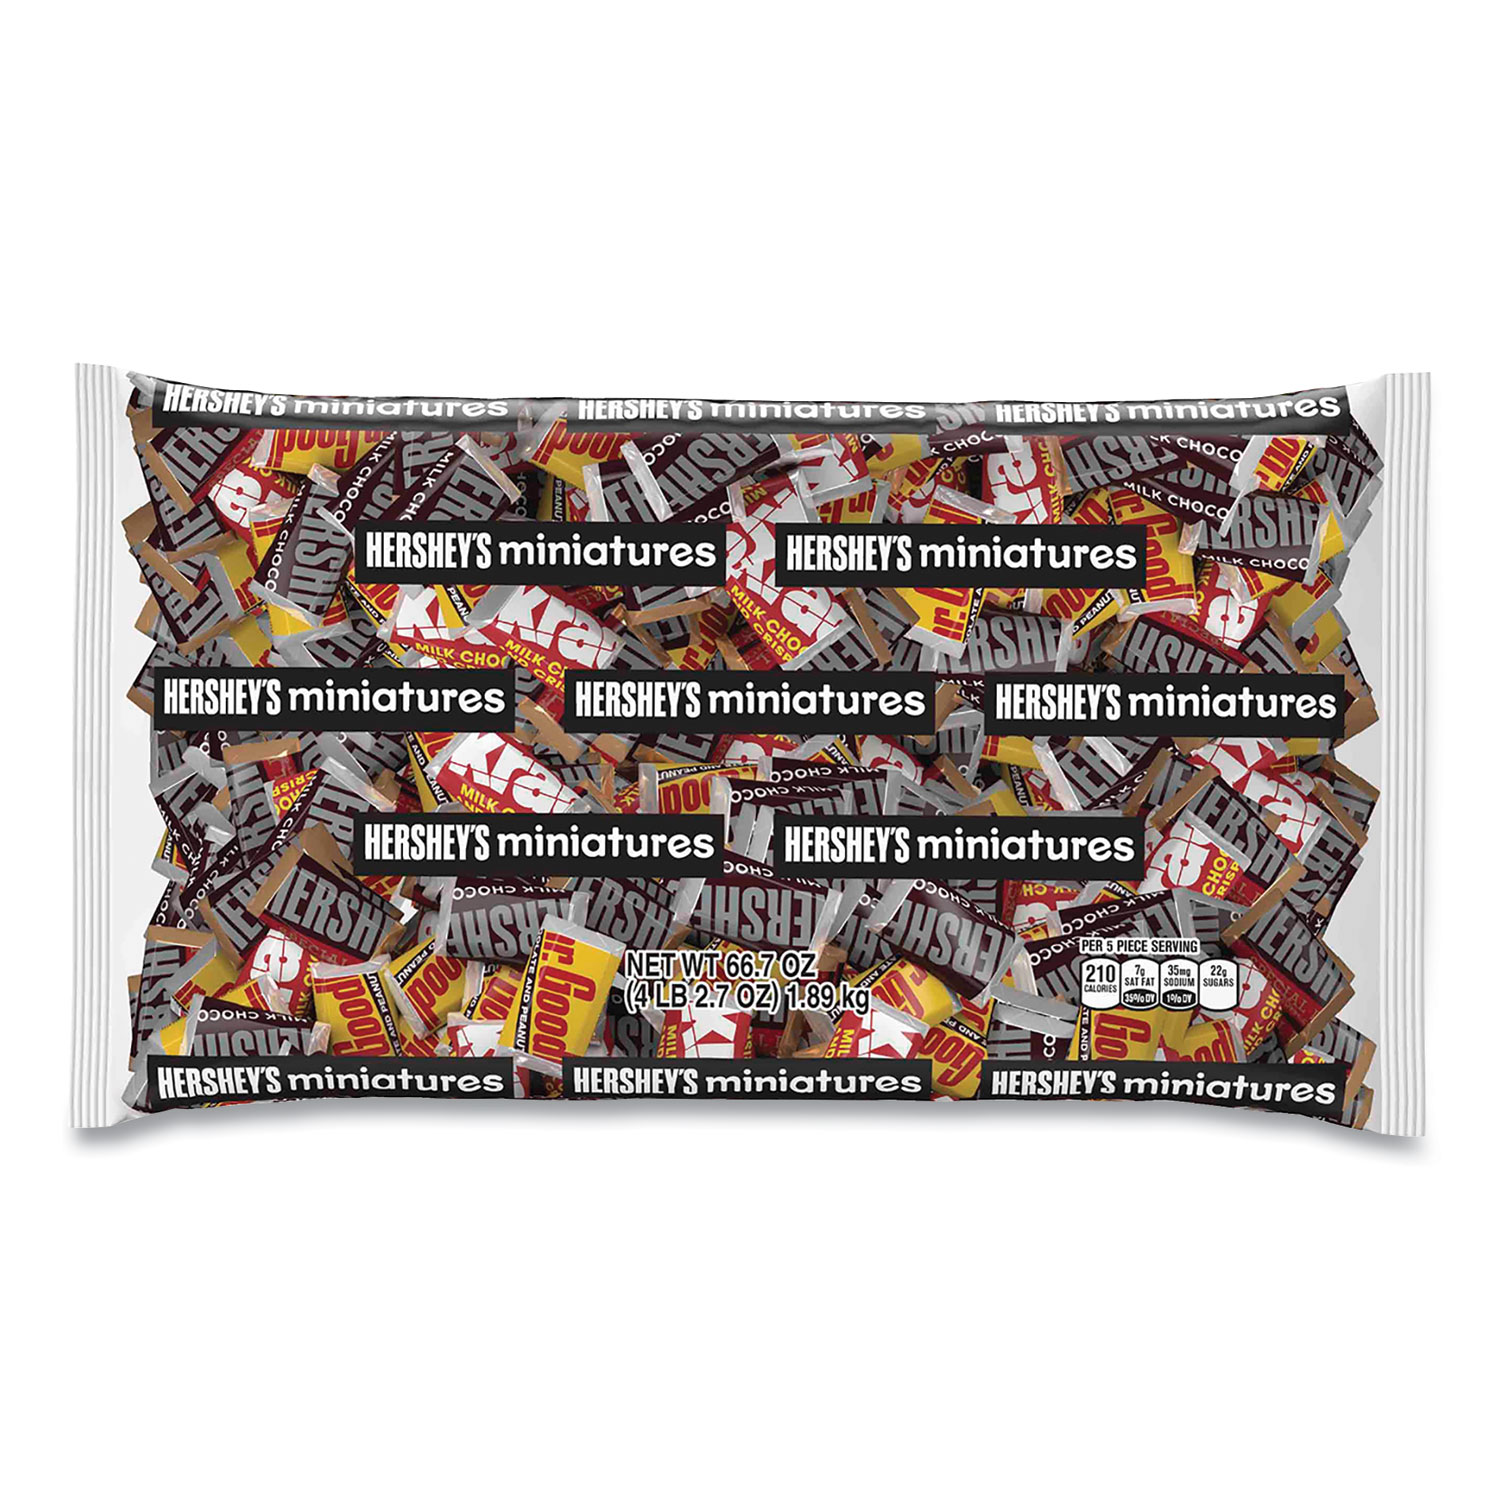 Hershey®s Miniatures Variety Bulk Pack, Assorted Chocolates, 66.7 oz Bag, Free Delivery in 1-4 Business Days